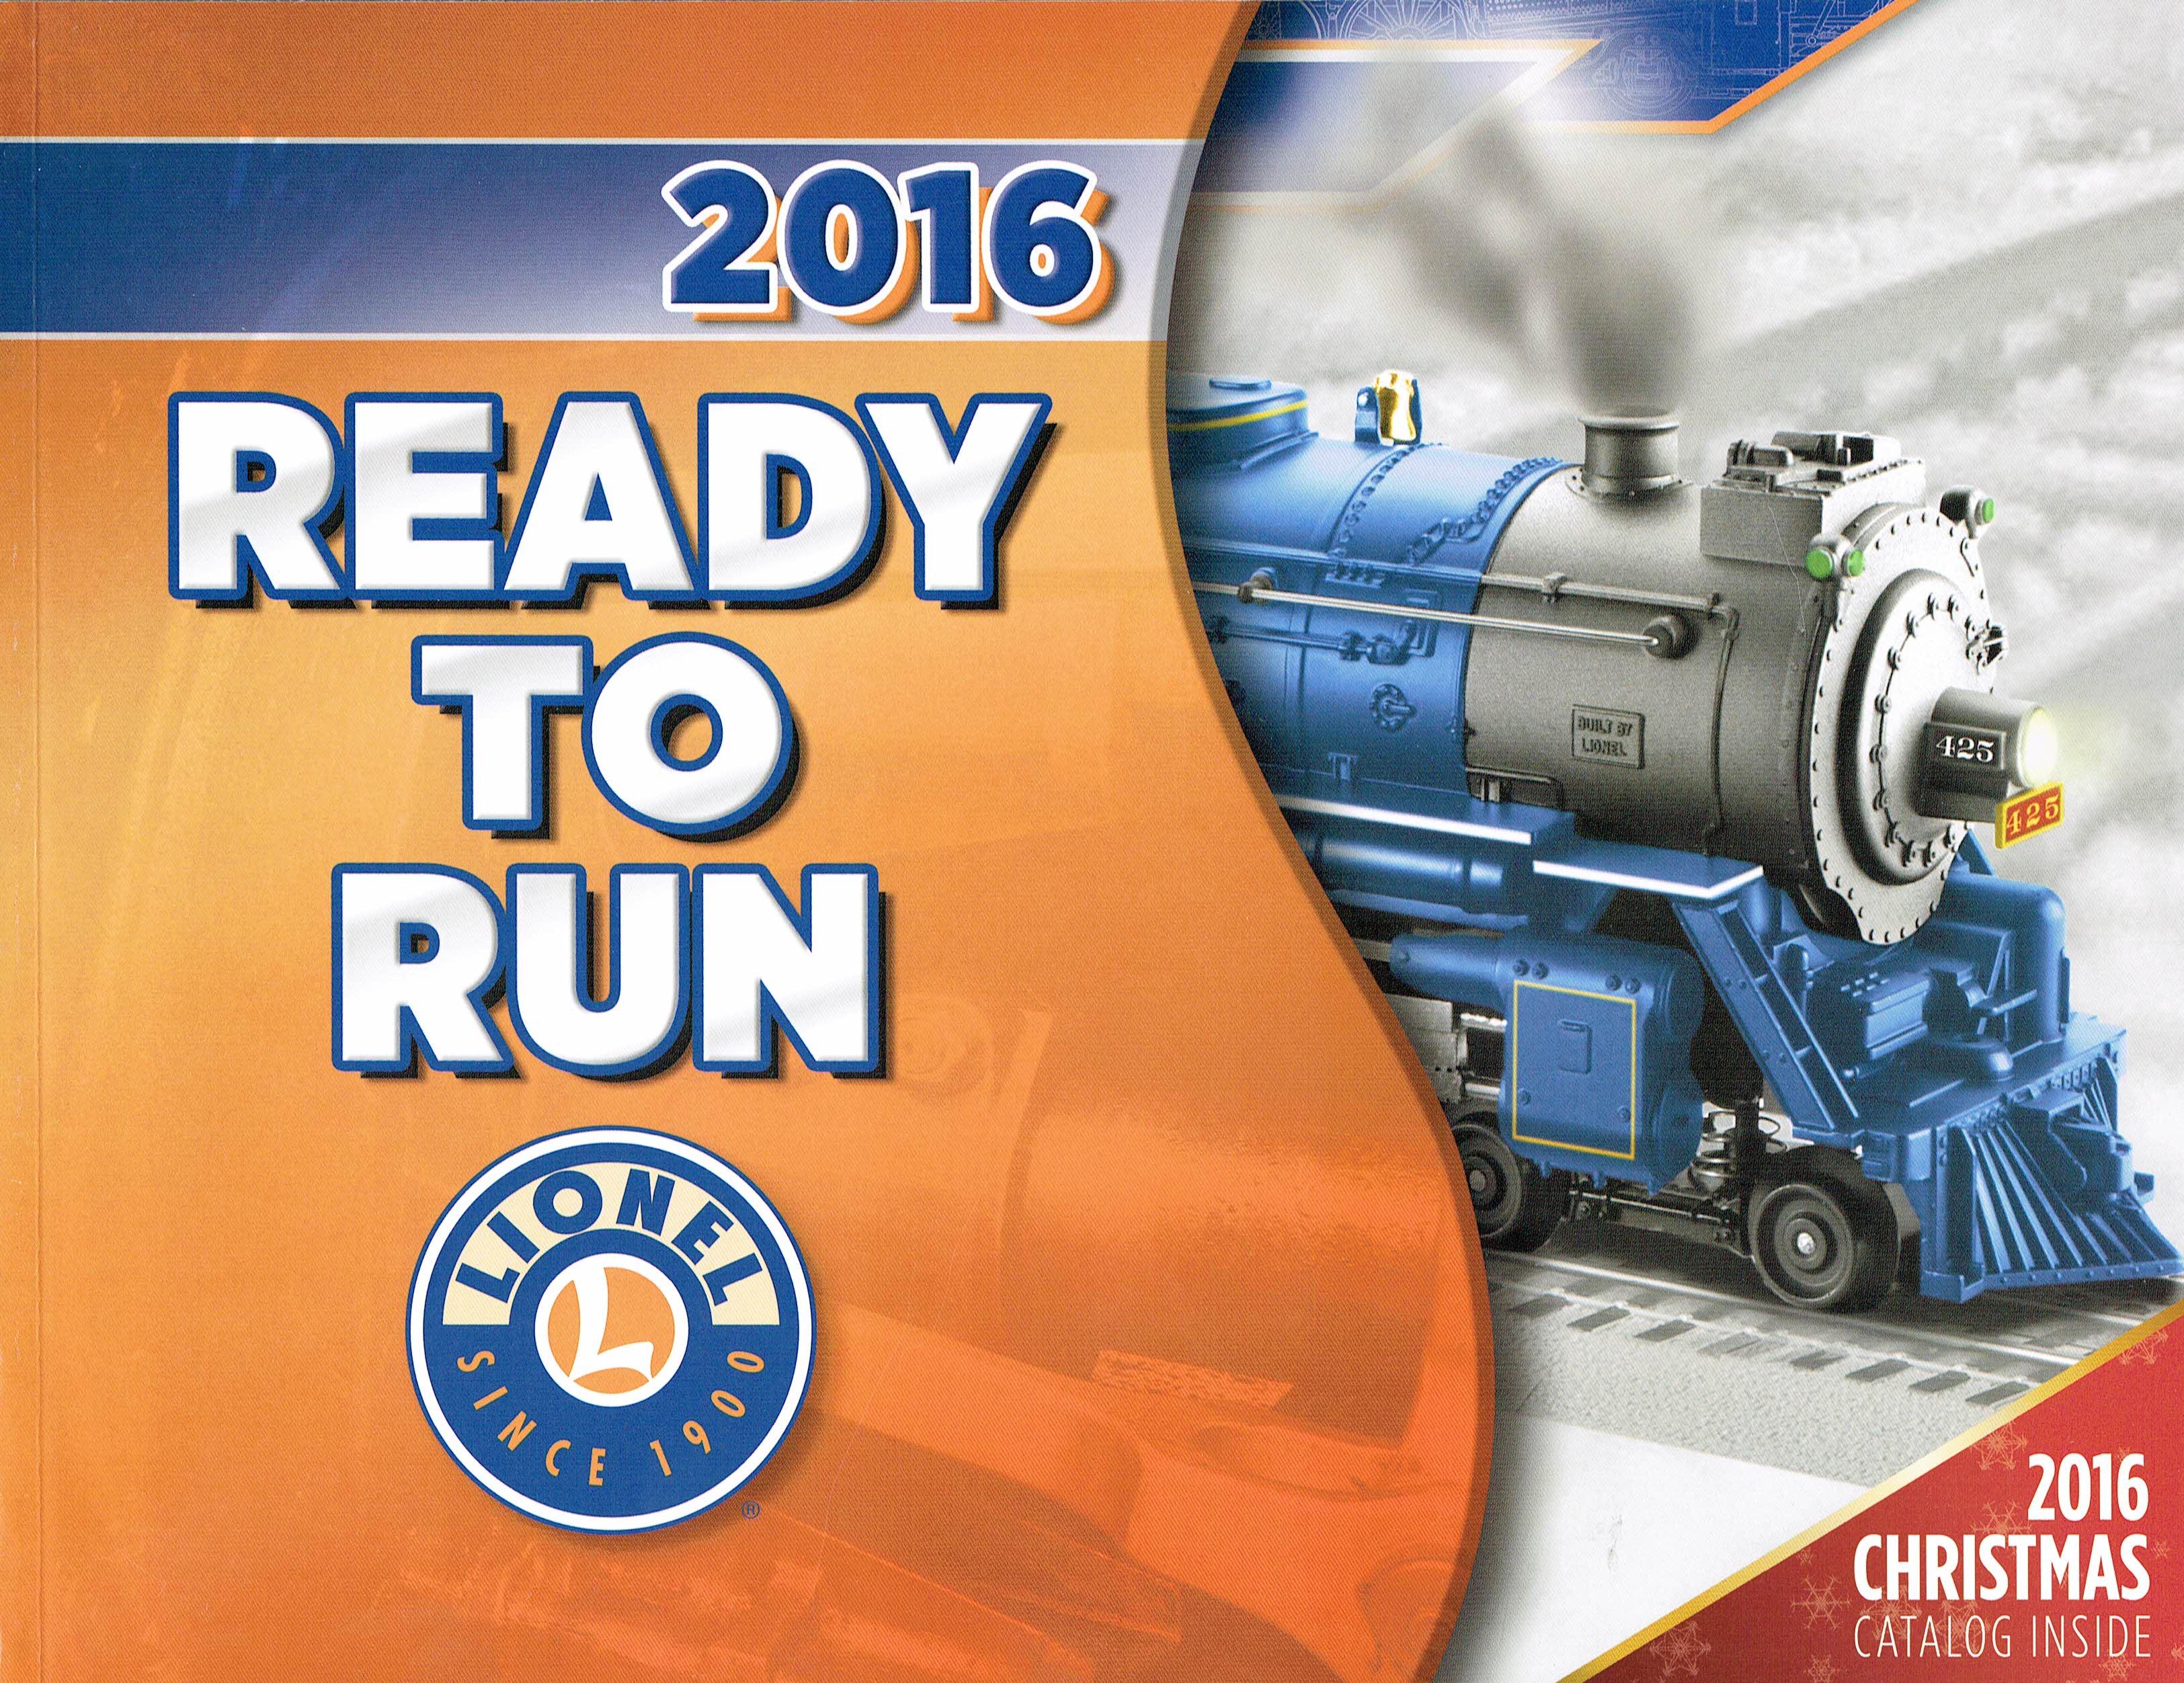 Lionel 2016 Ready-to-Run Catalog (includes Christmas catalog) image